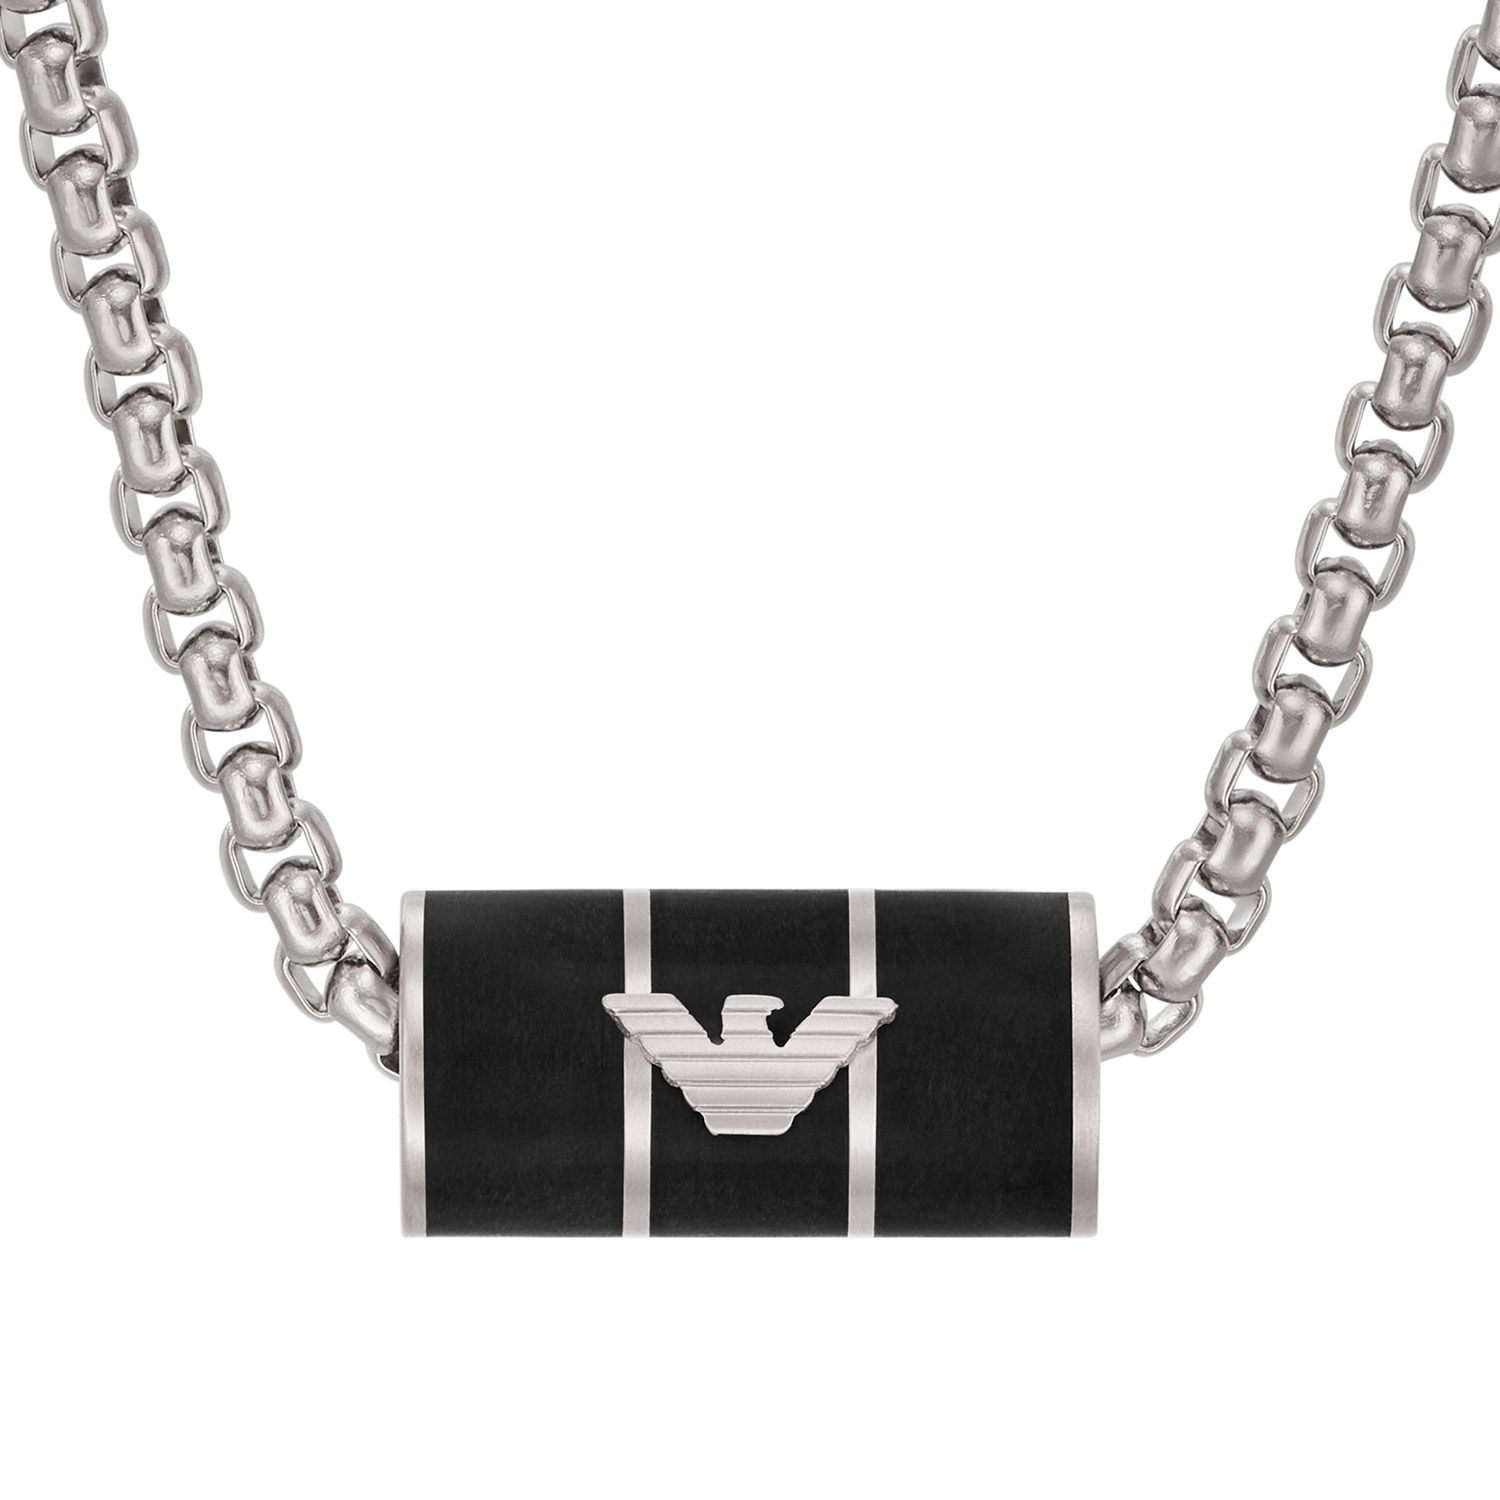 Emporio Armani EGS2919040 Men's Necklace Stainless Steel